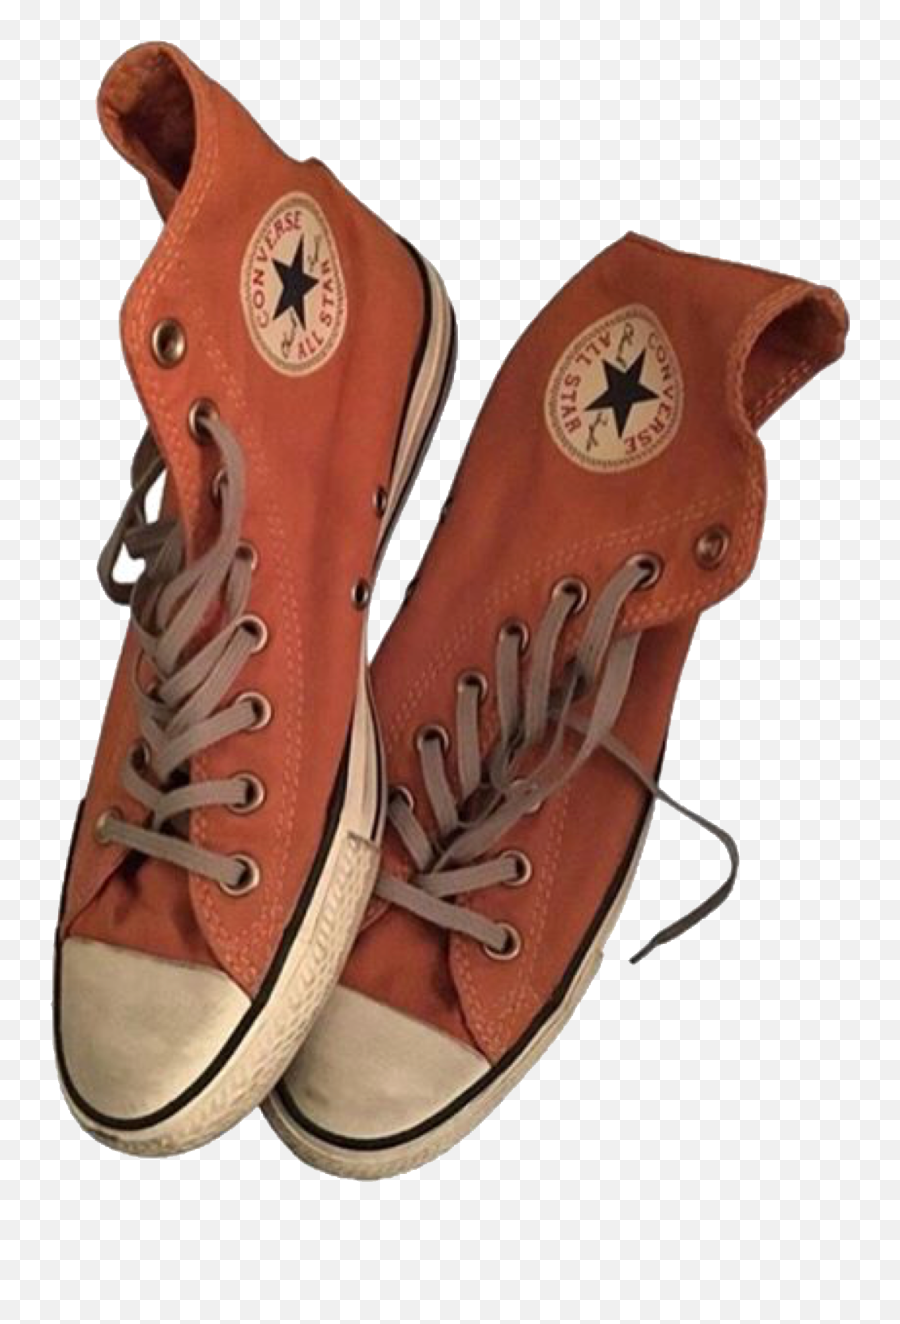 Pin By Strawberrypeach - Pngs Orange Shoes Converse Shoes Converse All Star,Converse Png